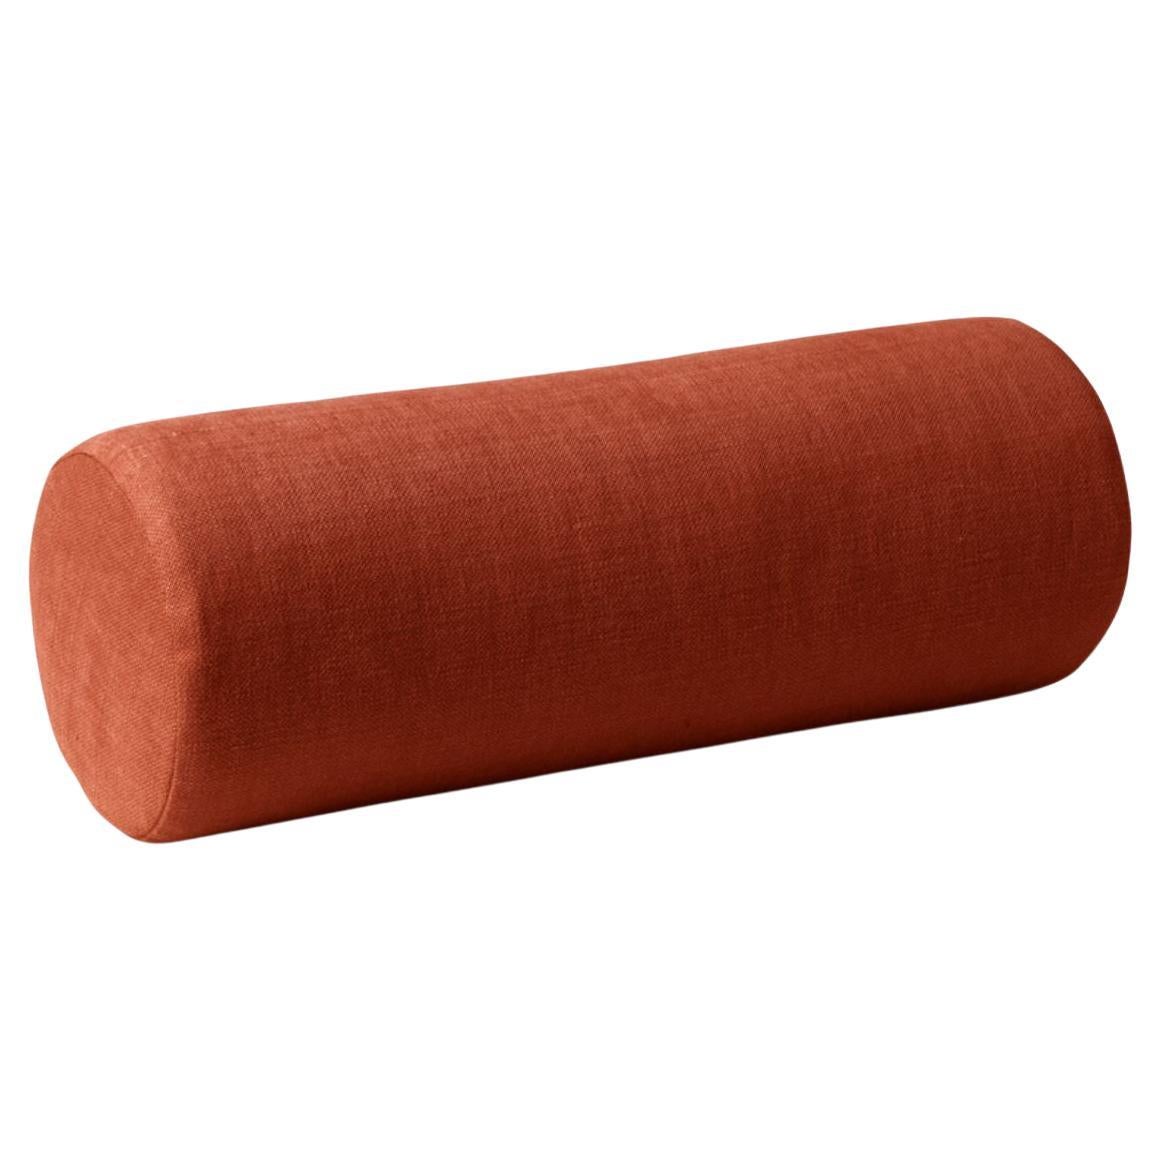 Galore Cushion Maple Red by Warm Nordic